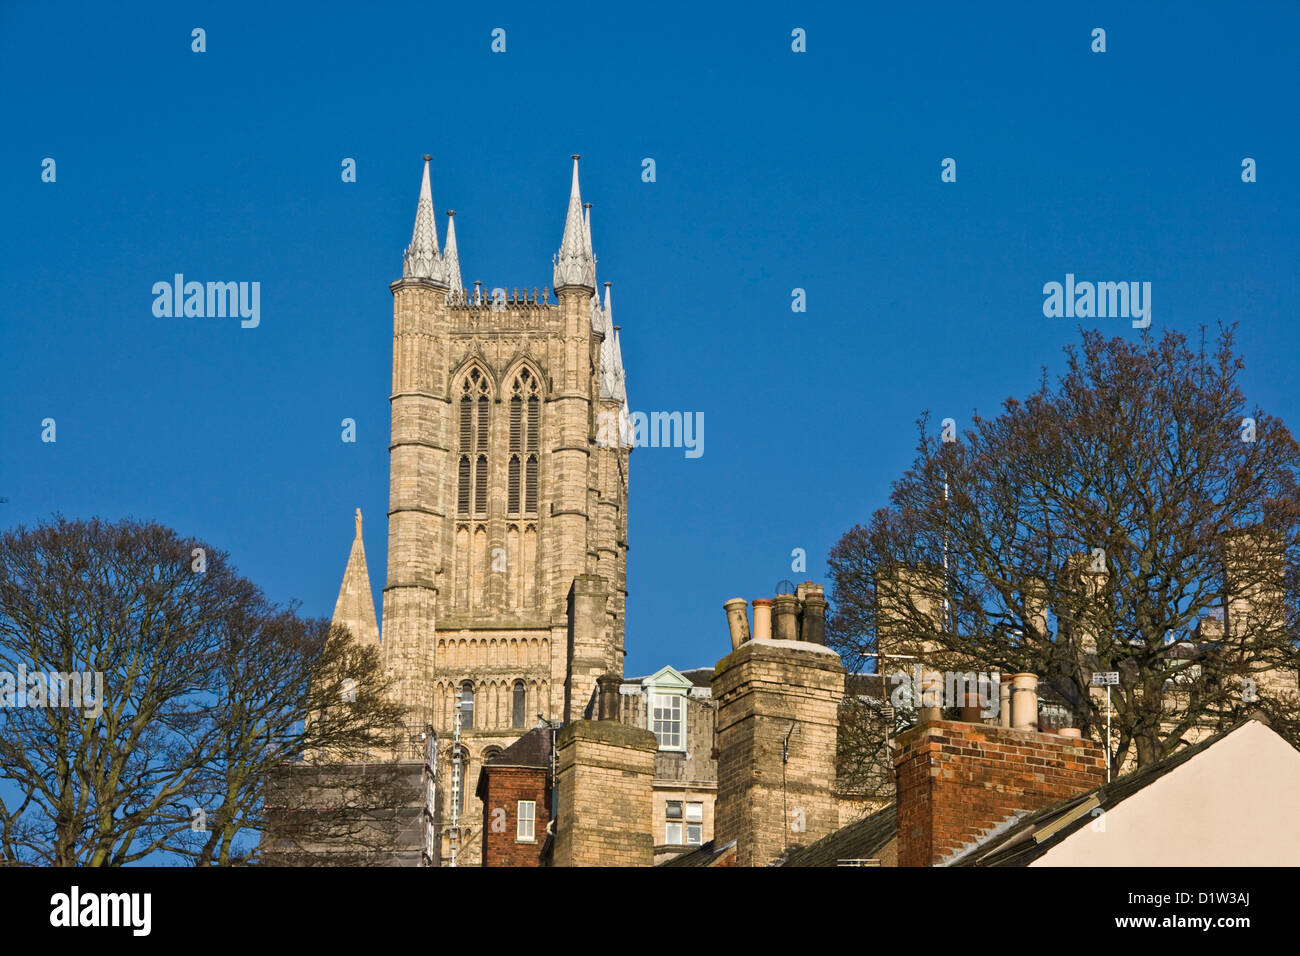 Lincoln Cathedral tower rising above chimneys and rooftops Lincolnshire England Europe Stock Photo